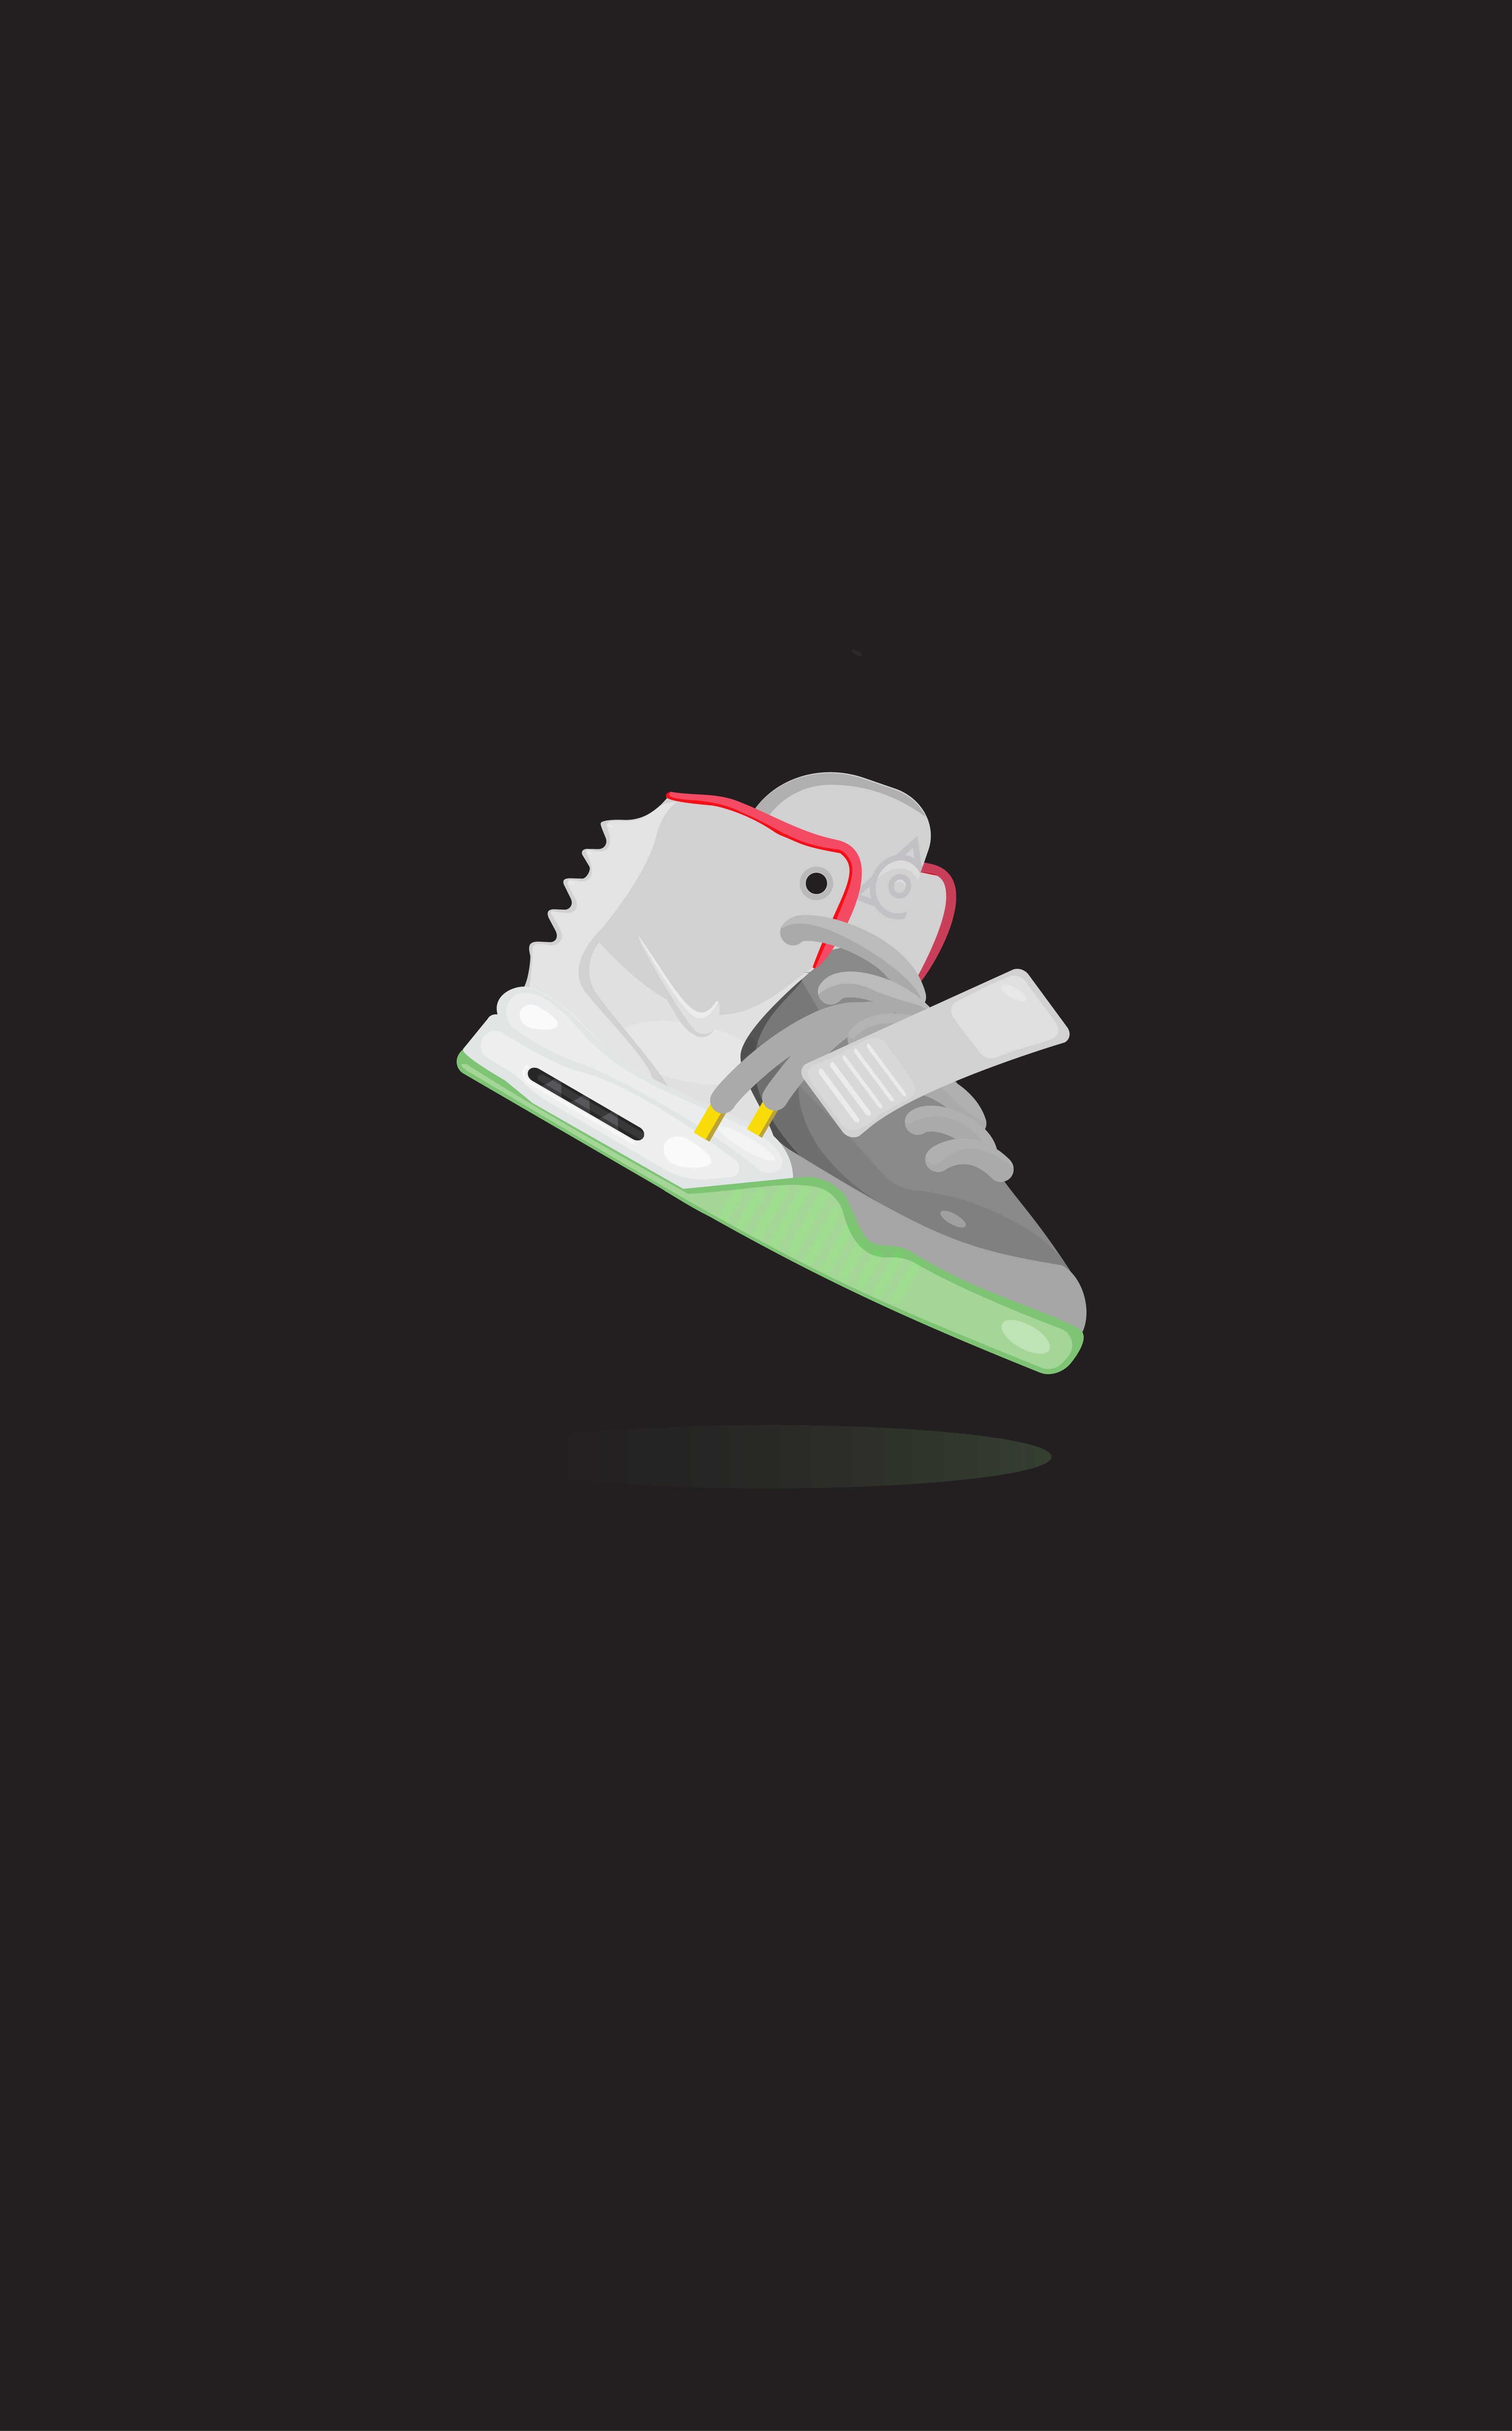 Yeezy wallpaper by Ow3n_Svh_ - Download on ZEDGE™, 4983